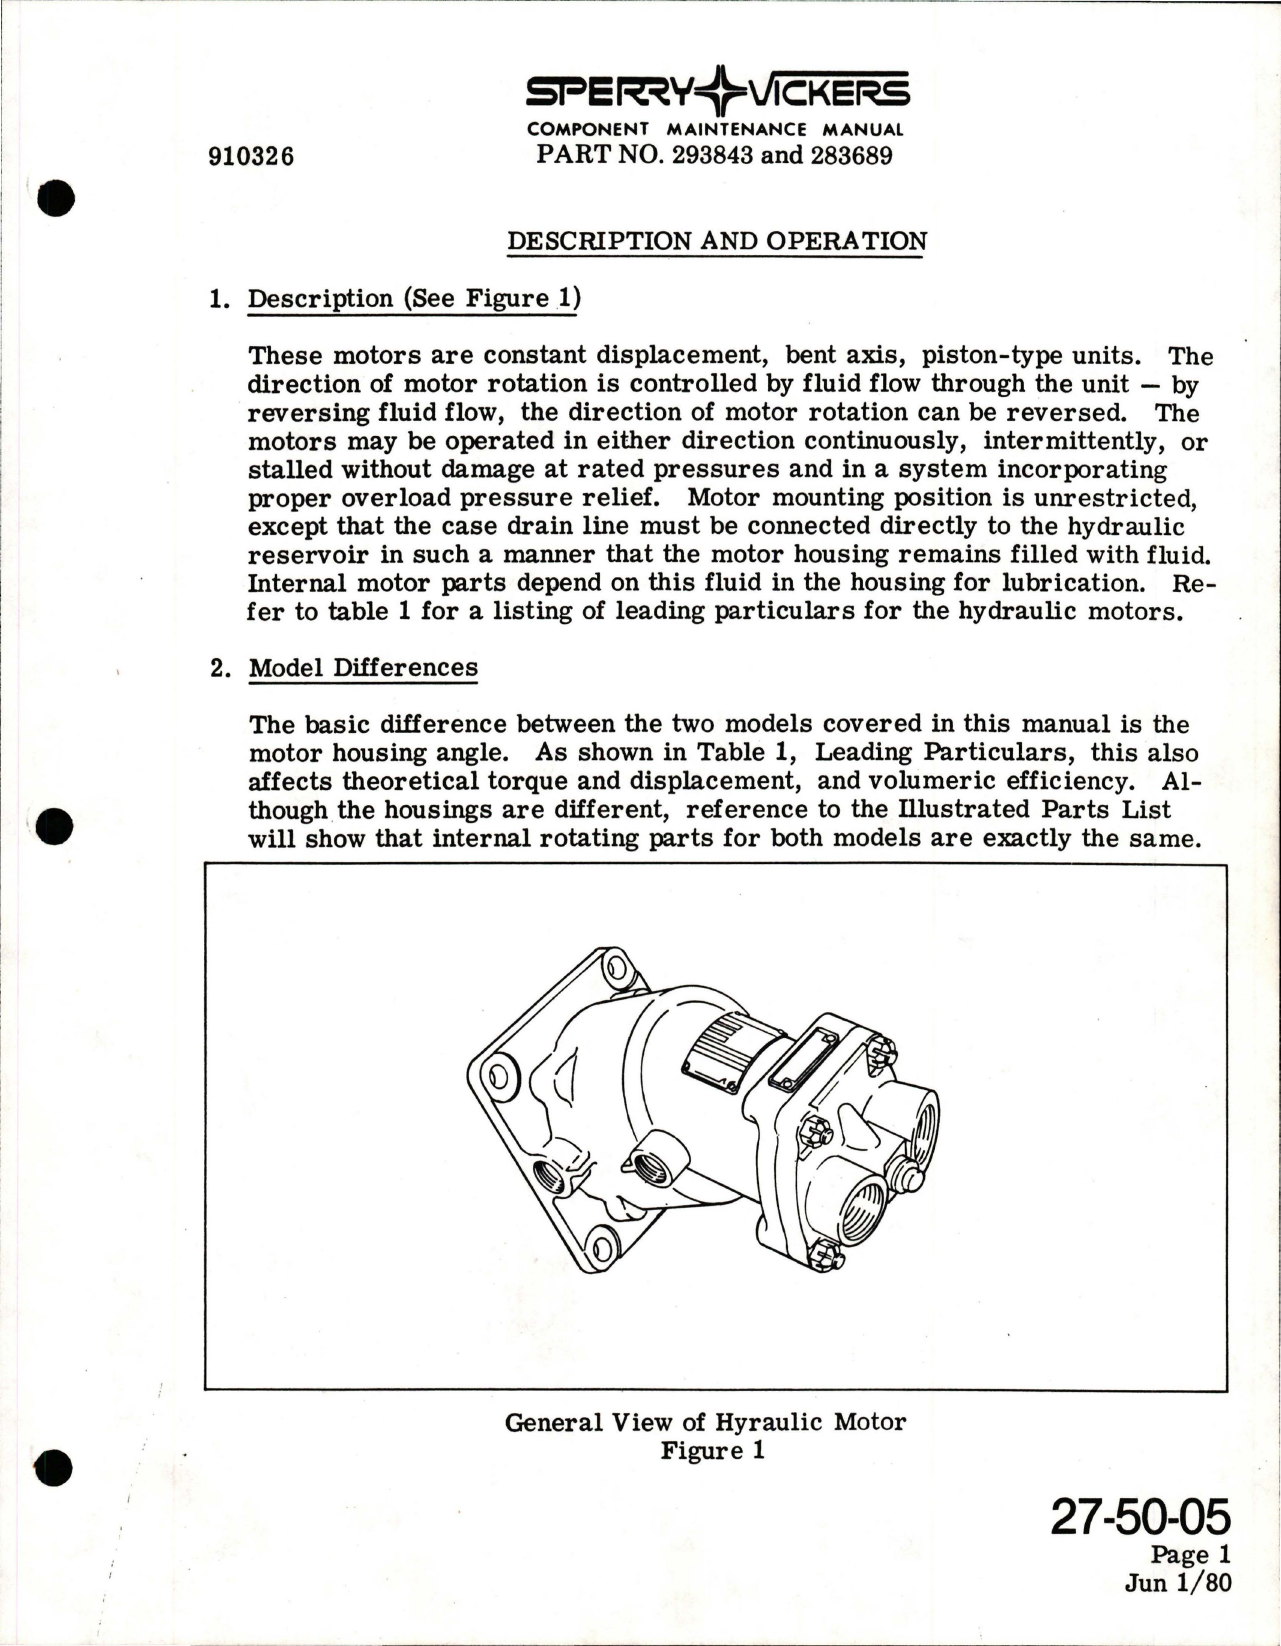 Sample page 7 from AirCorps Library document: Maintenance Manual with Illustrated Parts List for Constant Displacement Hydraulic Motor Assembly - Parts 293843 and 283689